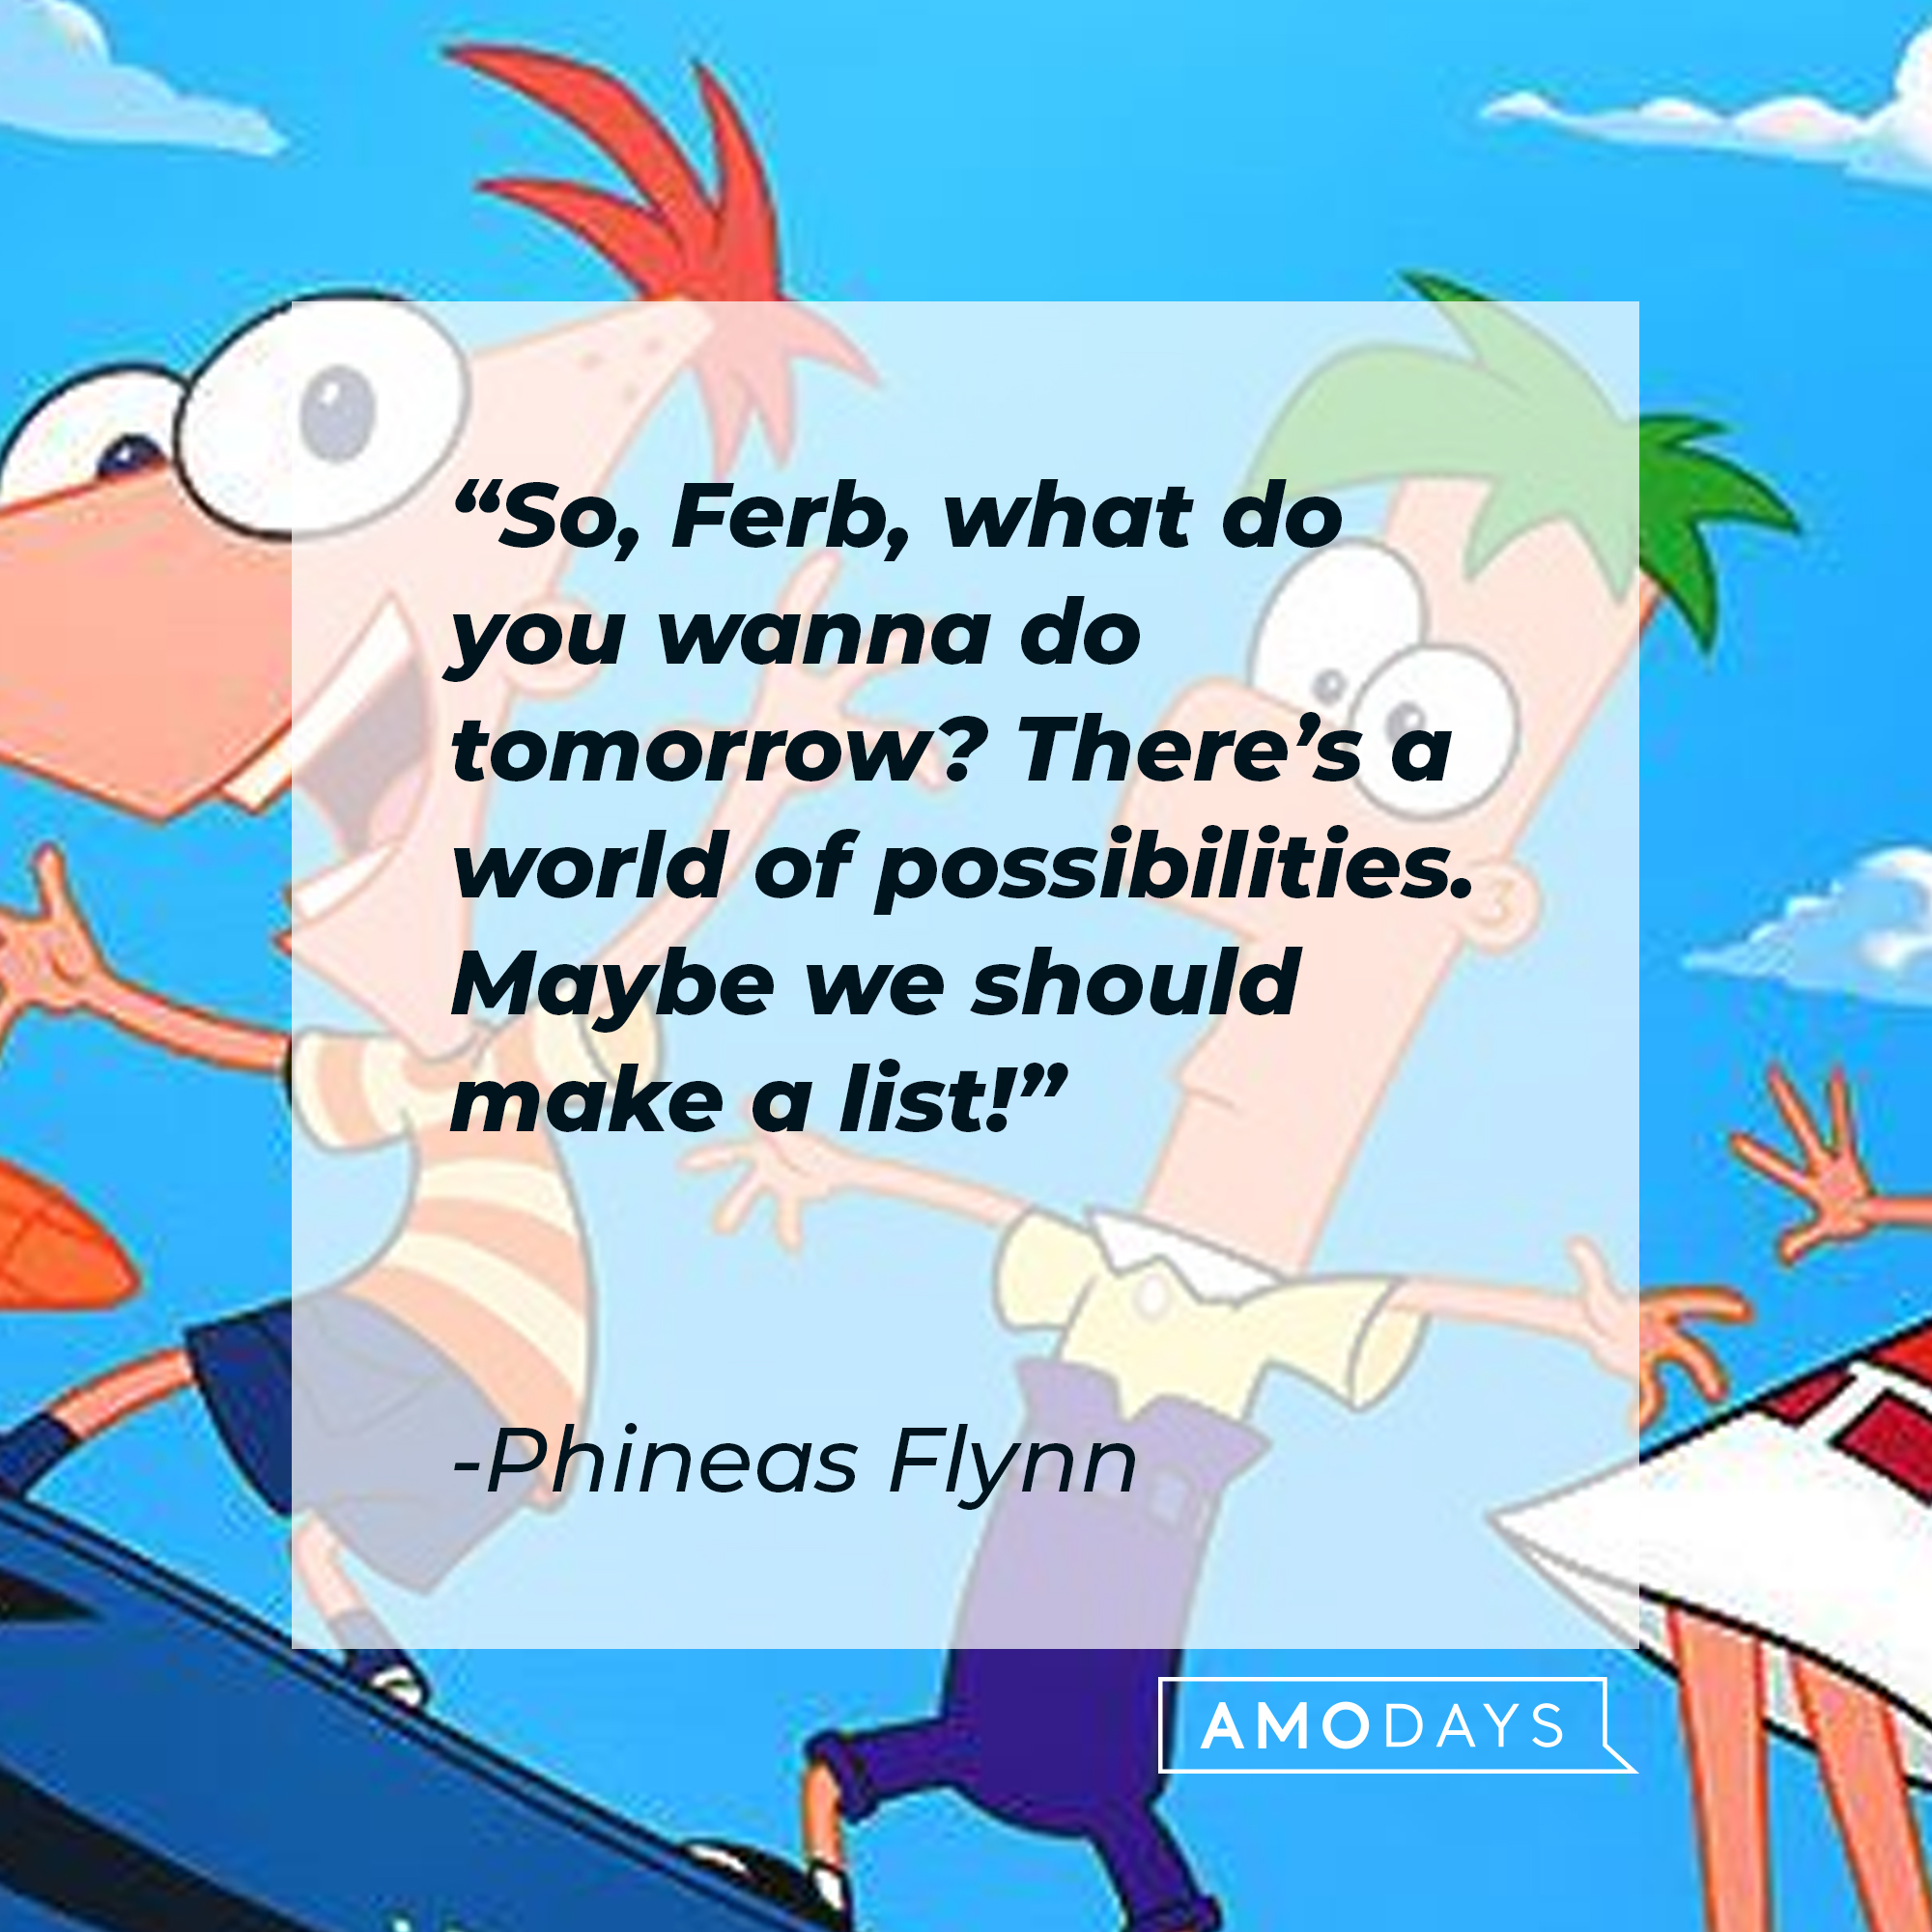 Phineas Flynn's quote: "So, Ferb, what do you wanna do tomorrow? There's a world of possibilities. Maybe we should make a list!" | Source: facebook.com/Phineas-and-Ferb